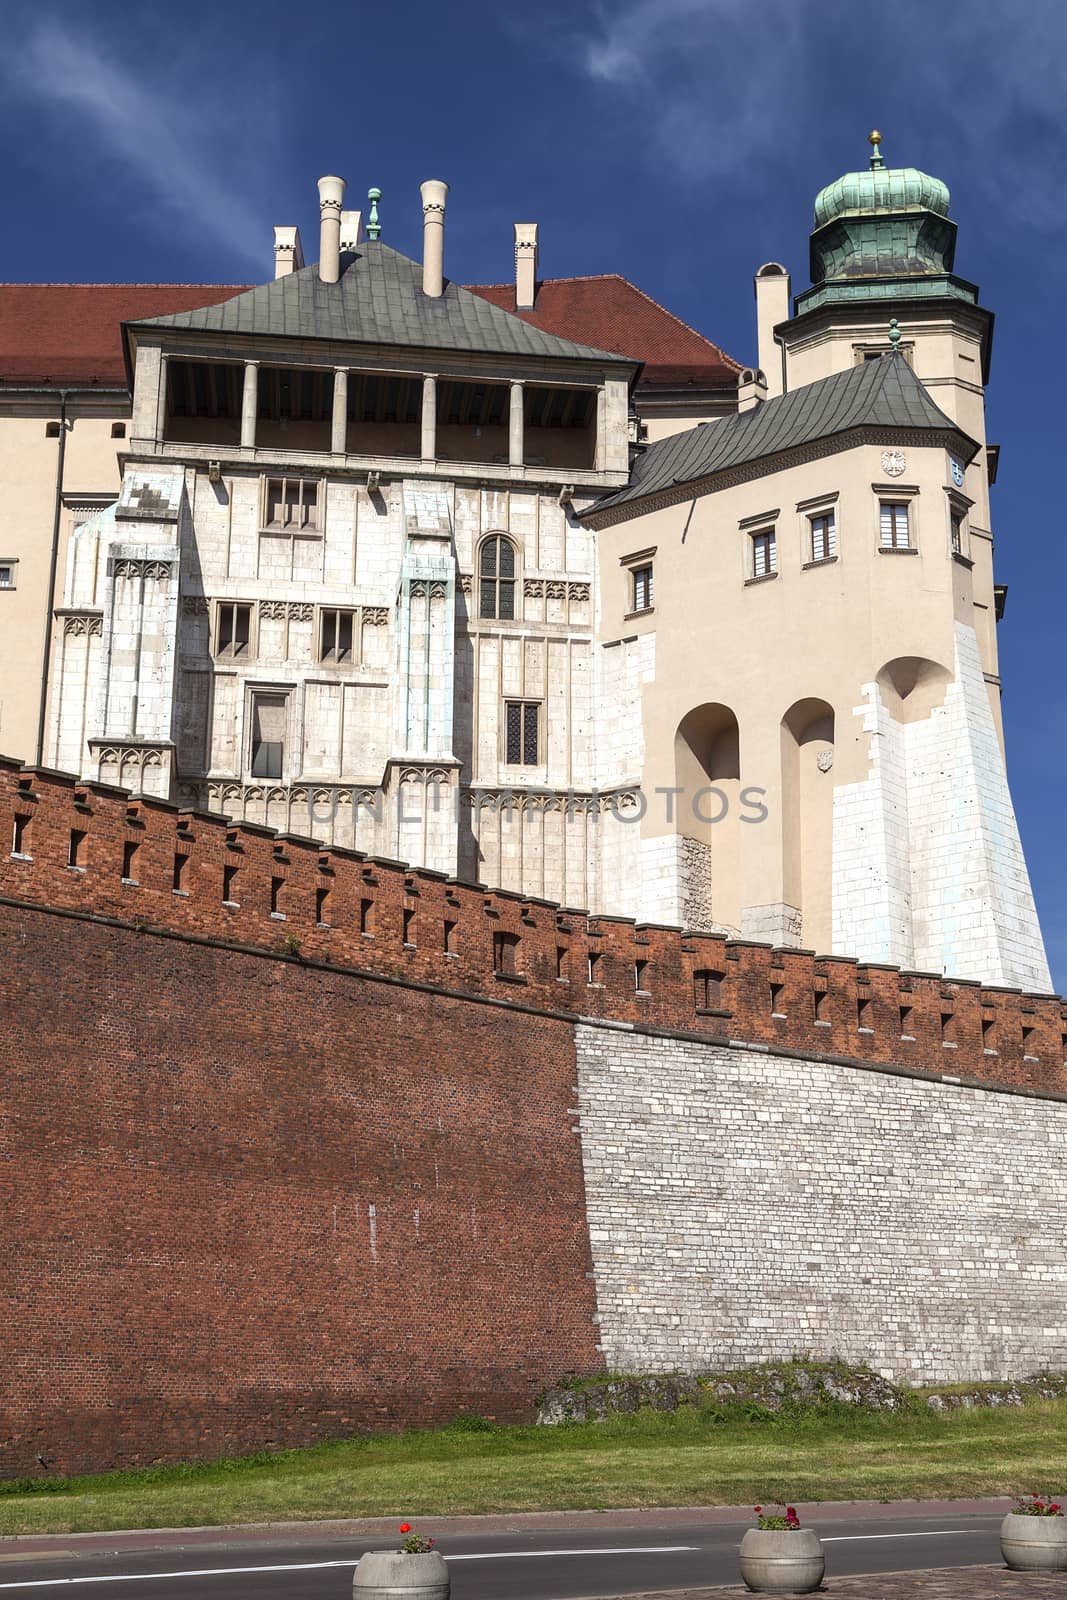 Wawel Royal Castle with defensive wall, Krakow, Poland. by mychadre77